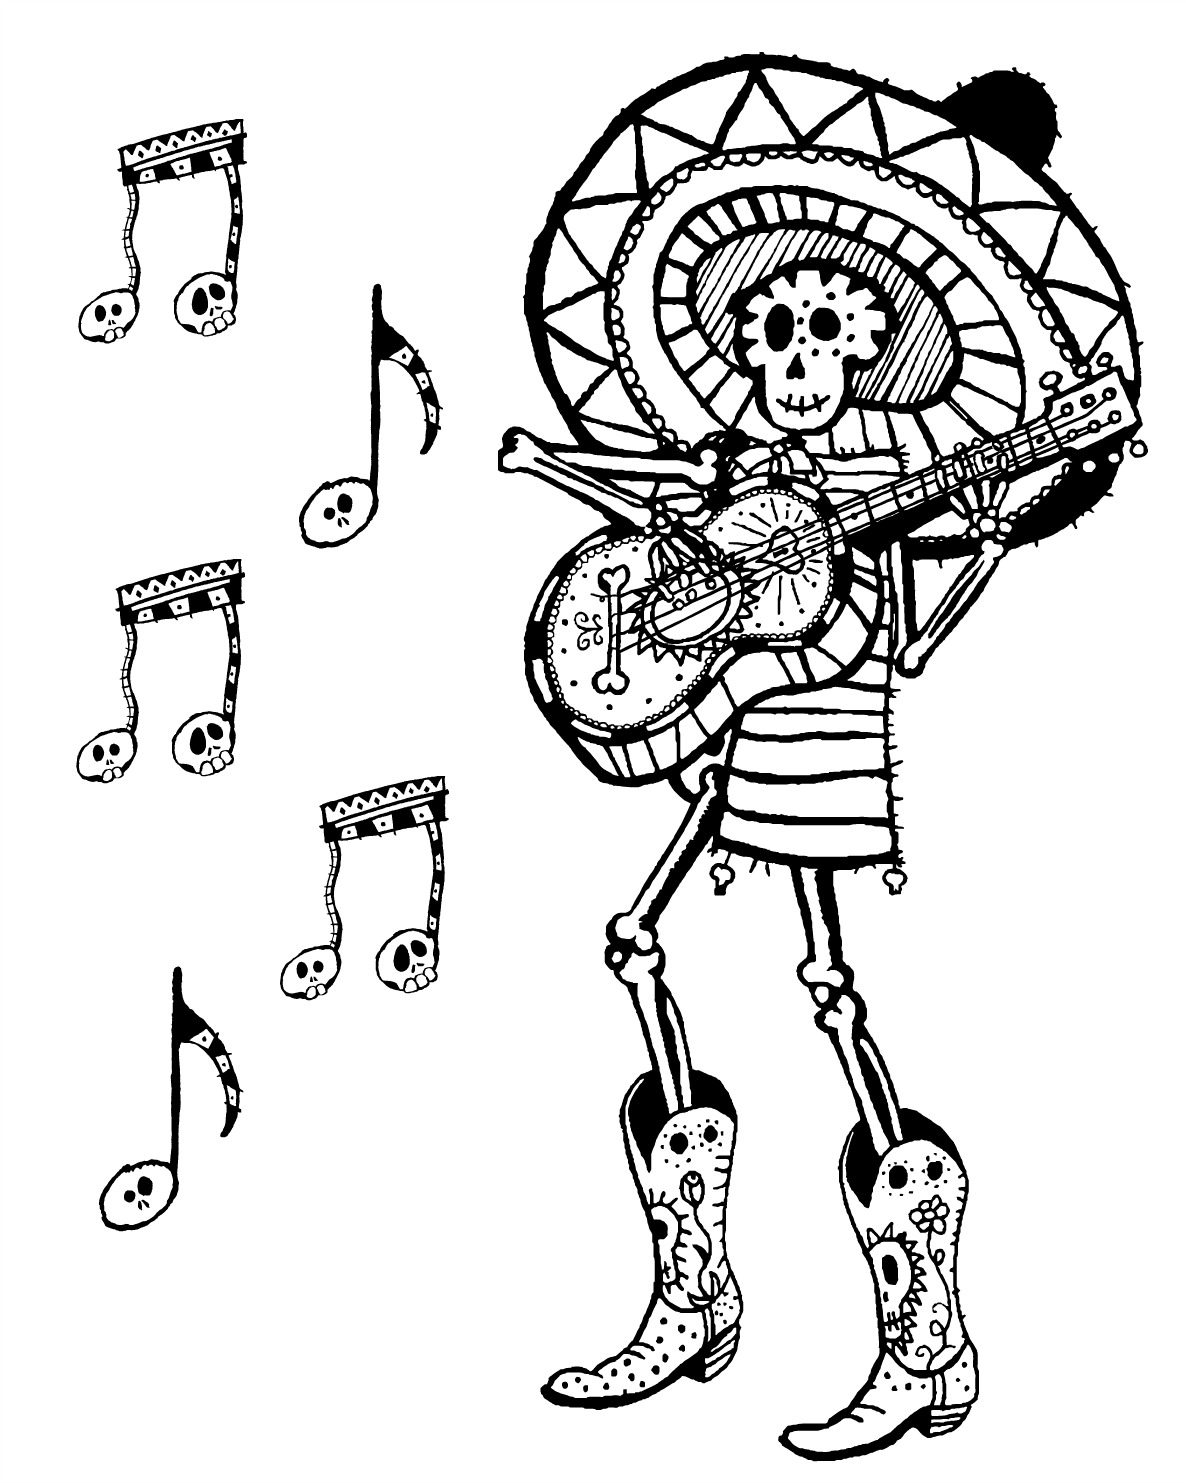 Free Printable Day of the Dead Skeleton Musician Coloring Page #dayofthedead #diadelosmuertos #freeprintable #coloringpage #skeleton #musician #skeletonmusician #sugarskull